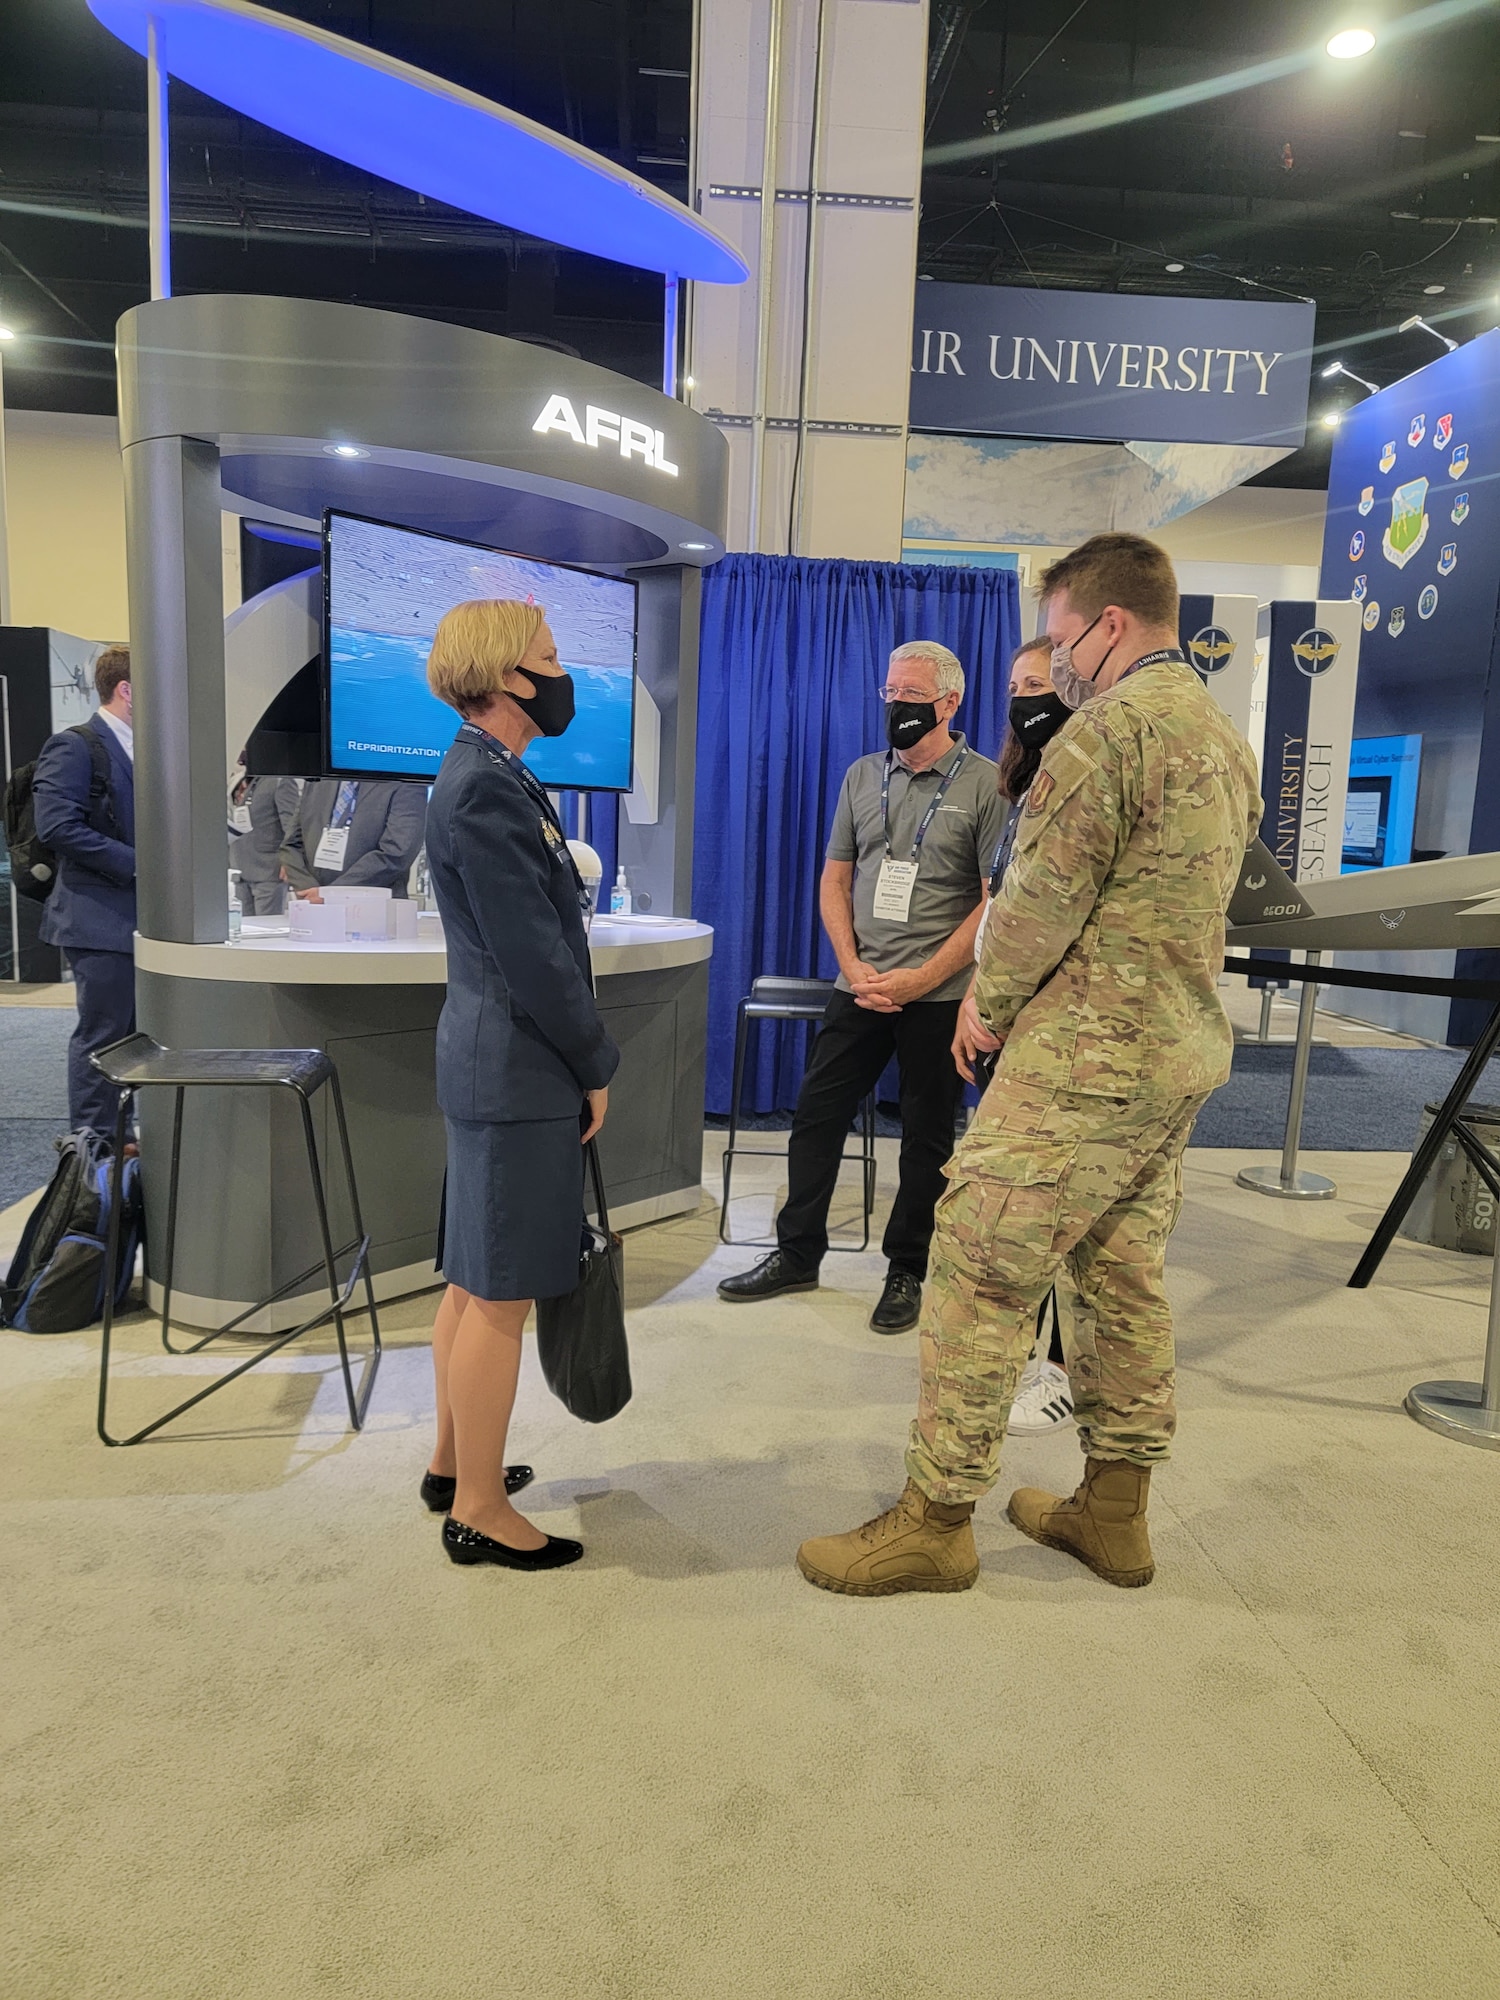 Maj. Gen. Heather Pringle, commander of the Air Force Research Laboratory, speaks with scientists and engineers at AFRL's exhibit booth at the Air Force Association's Air, Space & Cyber conference held in National Harbor, Maryland, Sept. 20-22, 2021. (U.S. Air Force photo/Steven Doub)